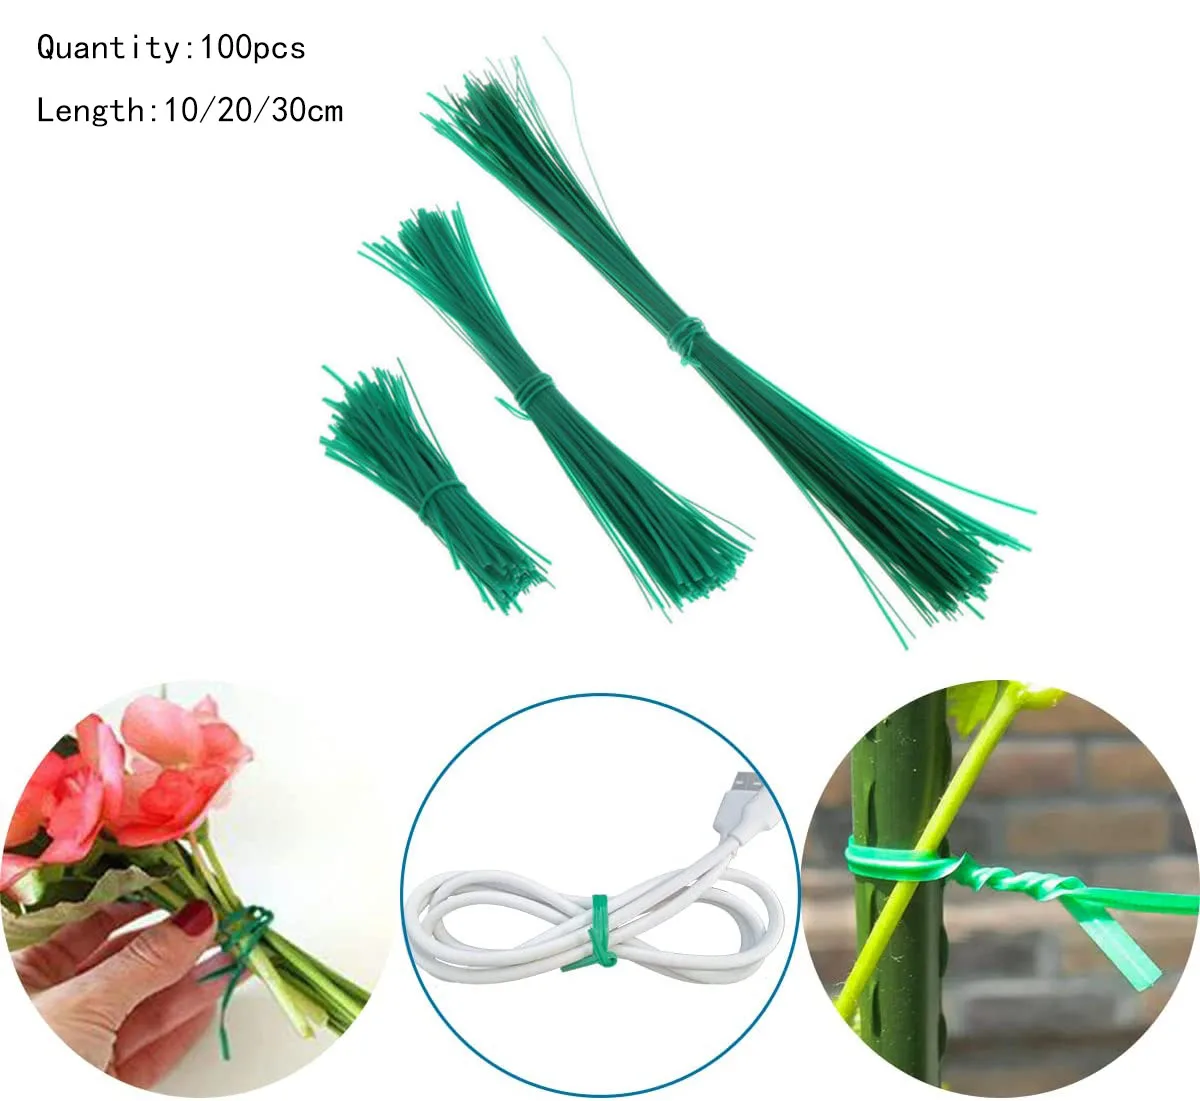 

100Pcs Gardening Cable Ties Reusable Oblate Iron Wire Twist Tie for Flower Plant Climbing Vines Multifunction Coated Fix Strings